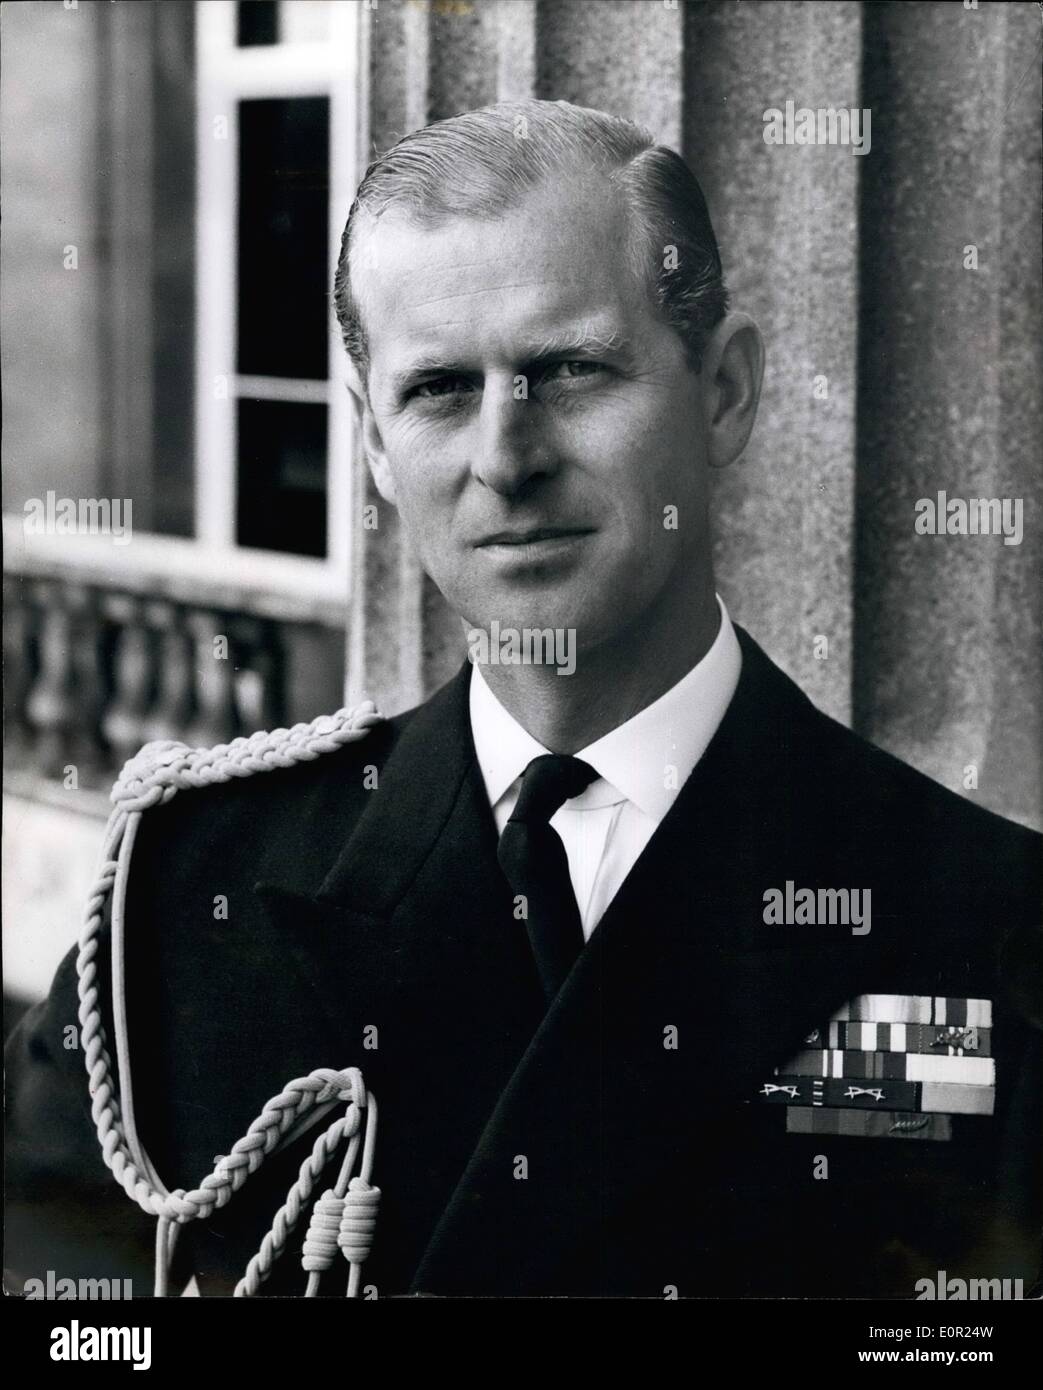 Oct. 10, 1957 - H.R.H. The Prince Philip, Duke of Edinburgh: sRoyal Highness is portrayed in the uniform of an Admiral of the Fleet.Portrait Study by Antony Armstrong Jones; please acknowledge. Stock Photo